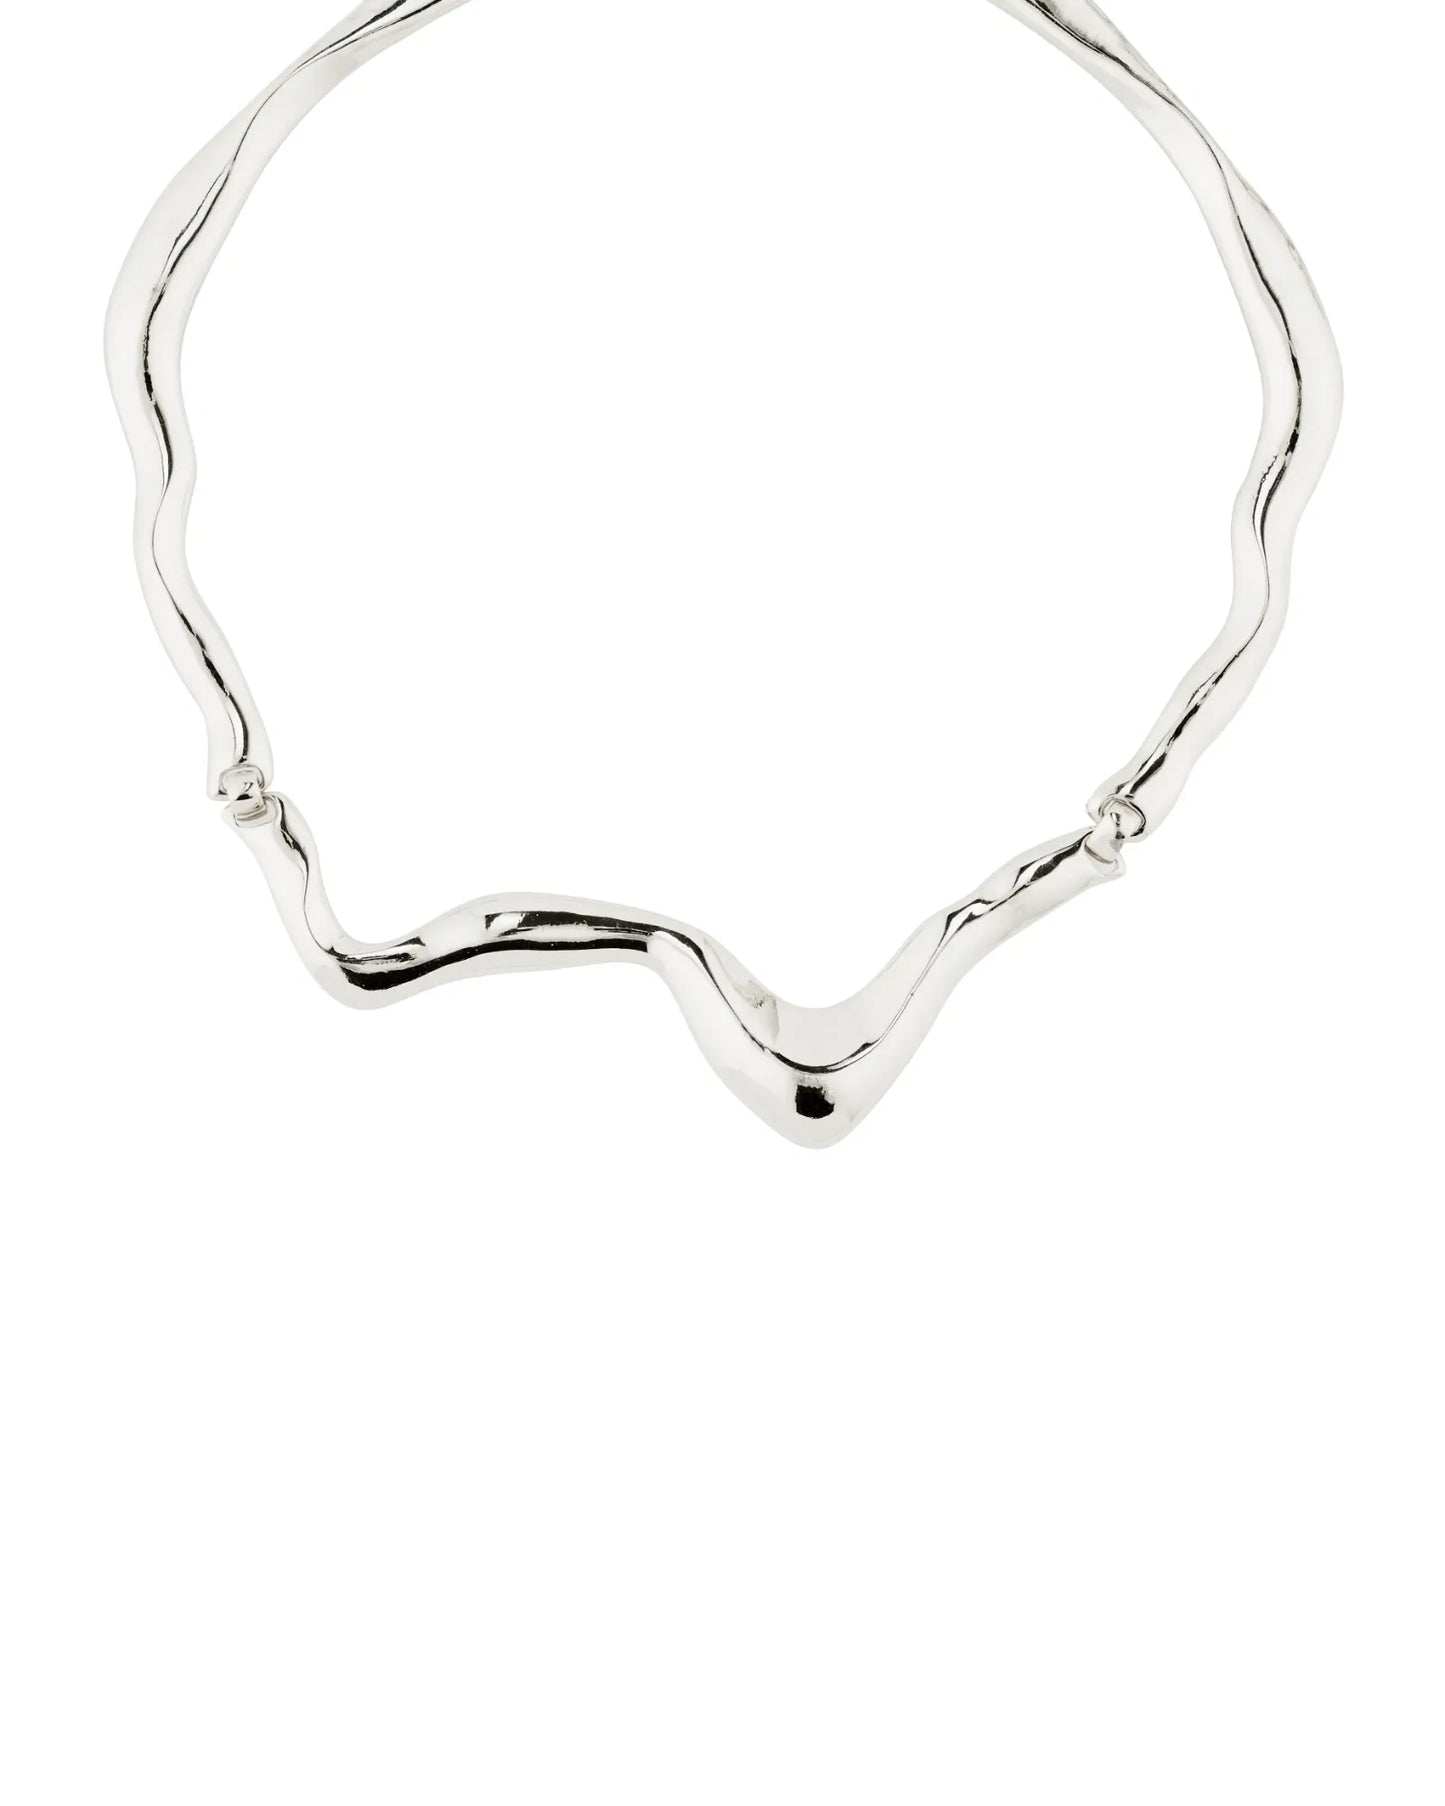 MOON Recycled Necklace - Silver Plated